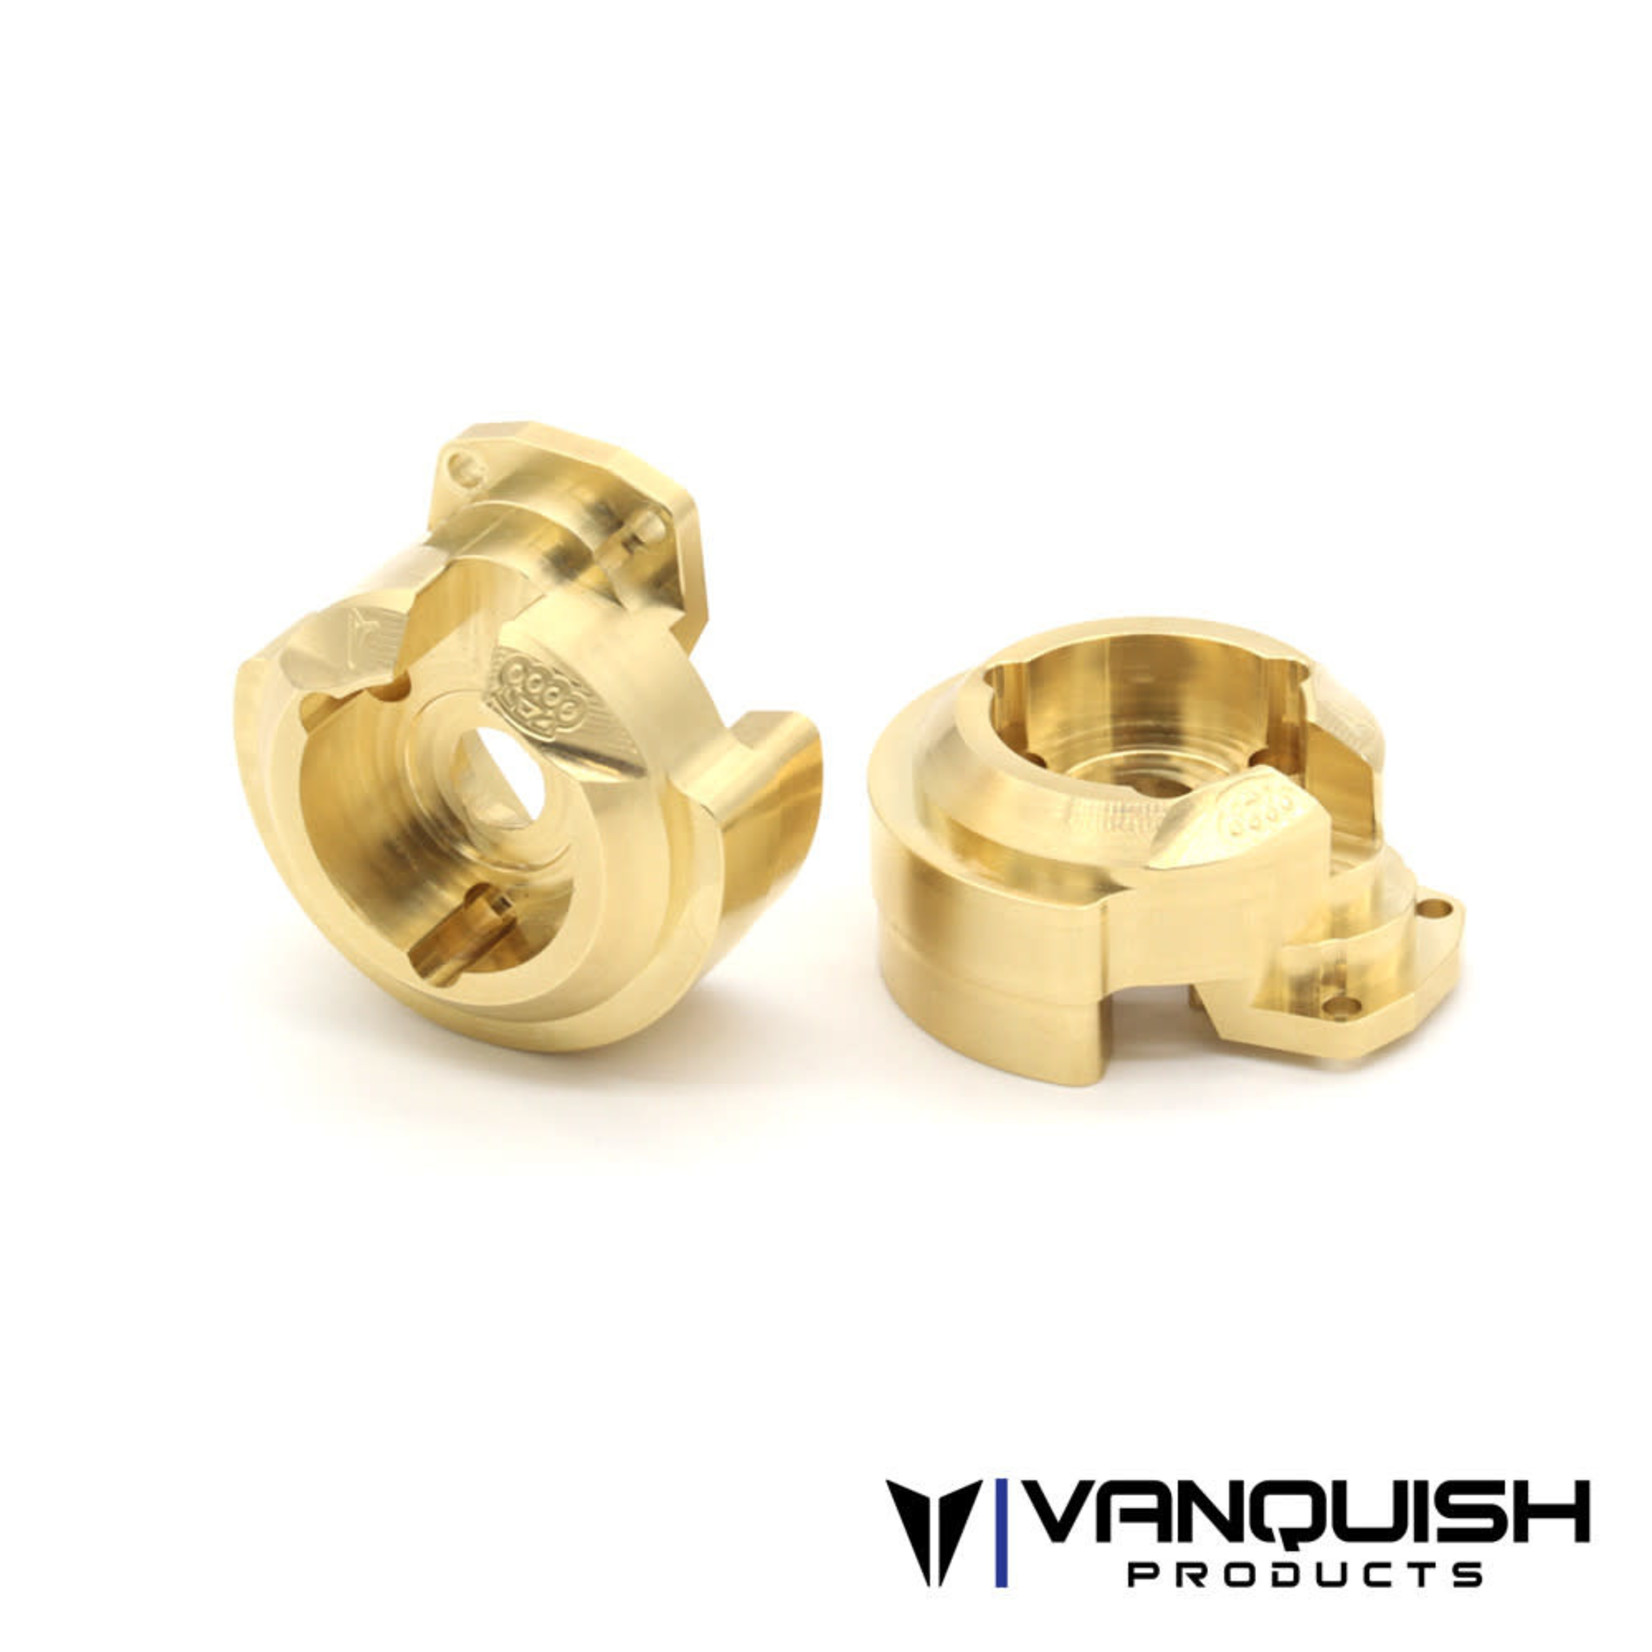 Vanquish Products Brass F10 Portal Knuckle Weight (2)